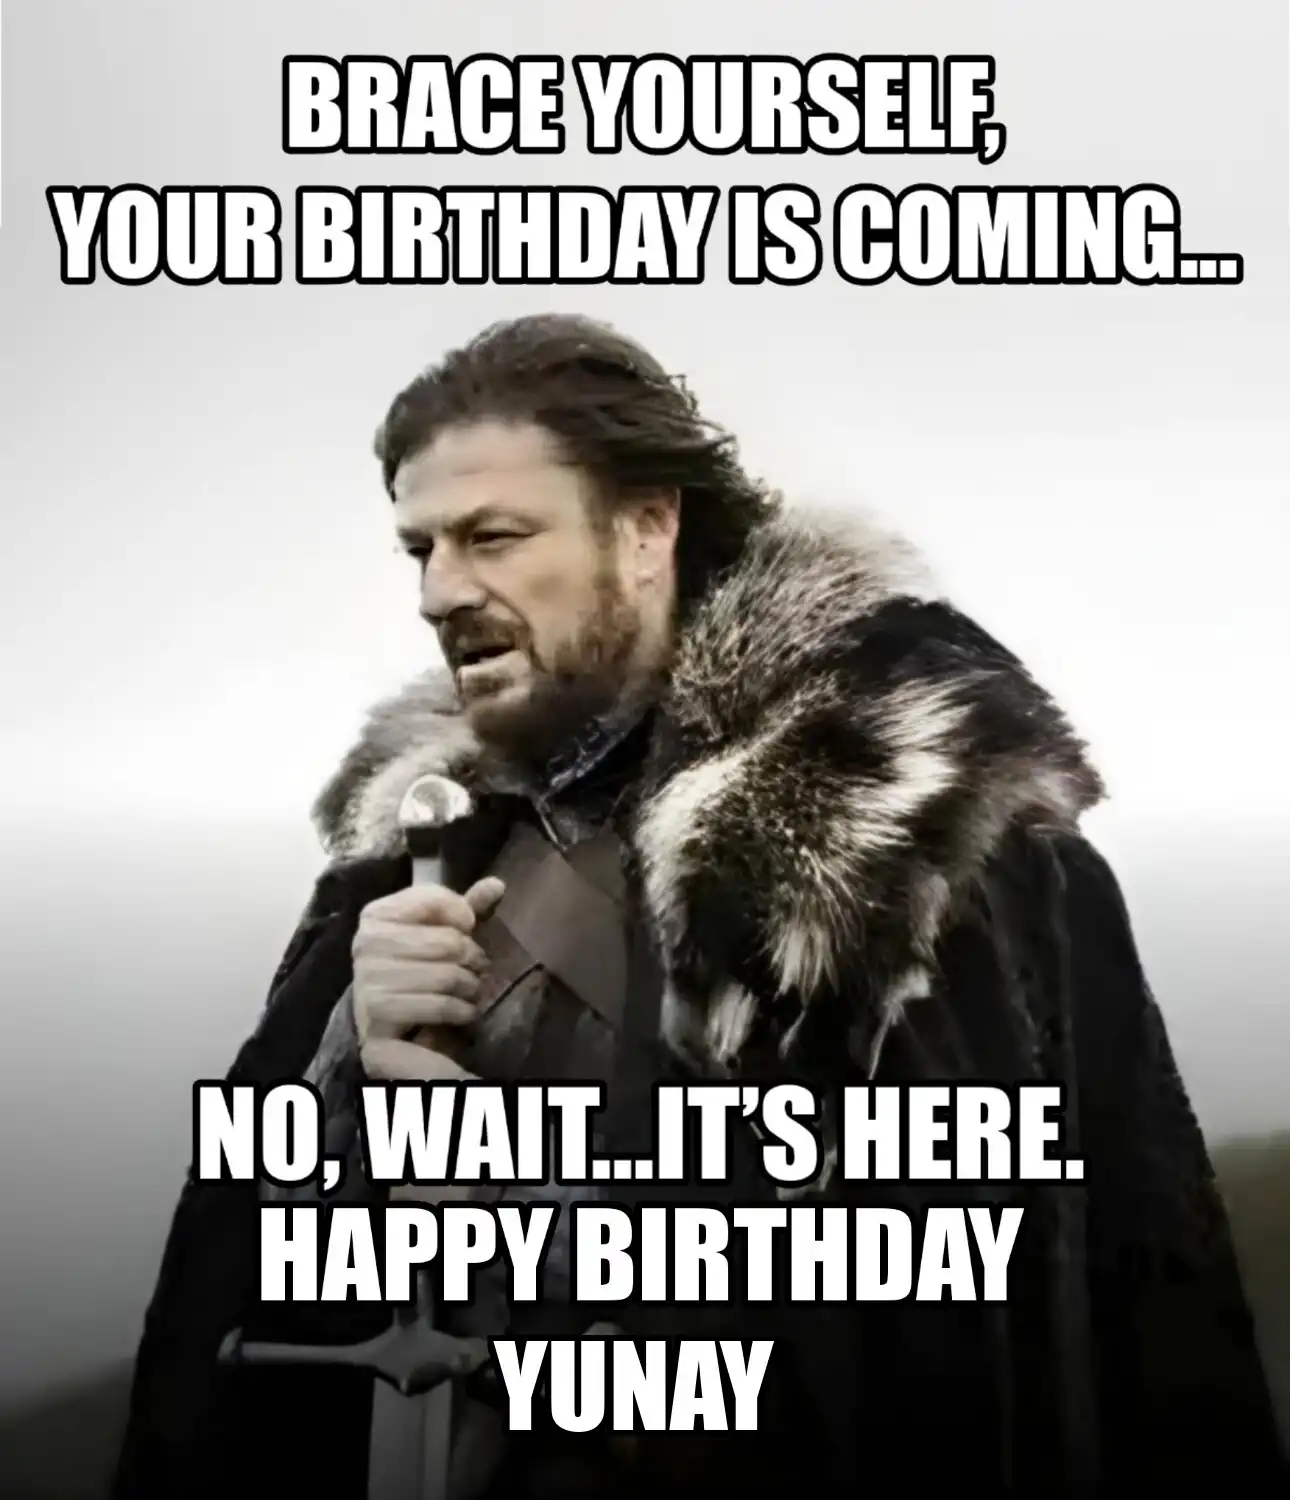 Happy Birthday Yunay Brace Yourself Your Birthday Is Coming Meme